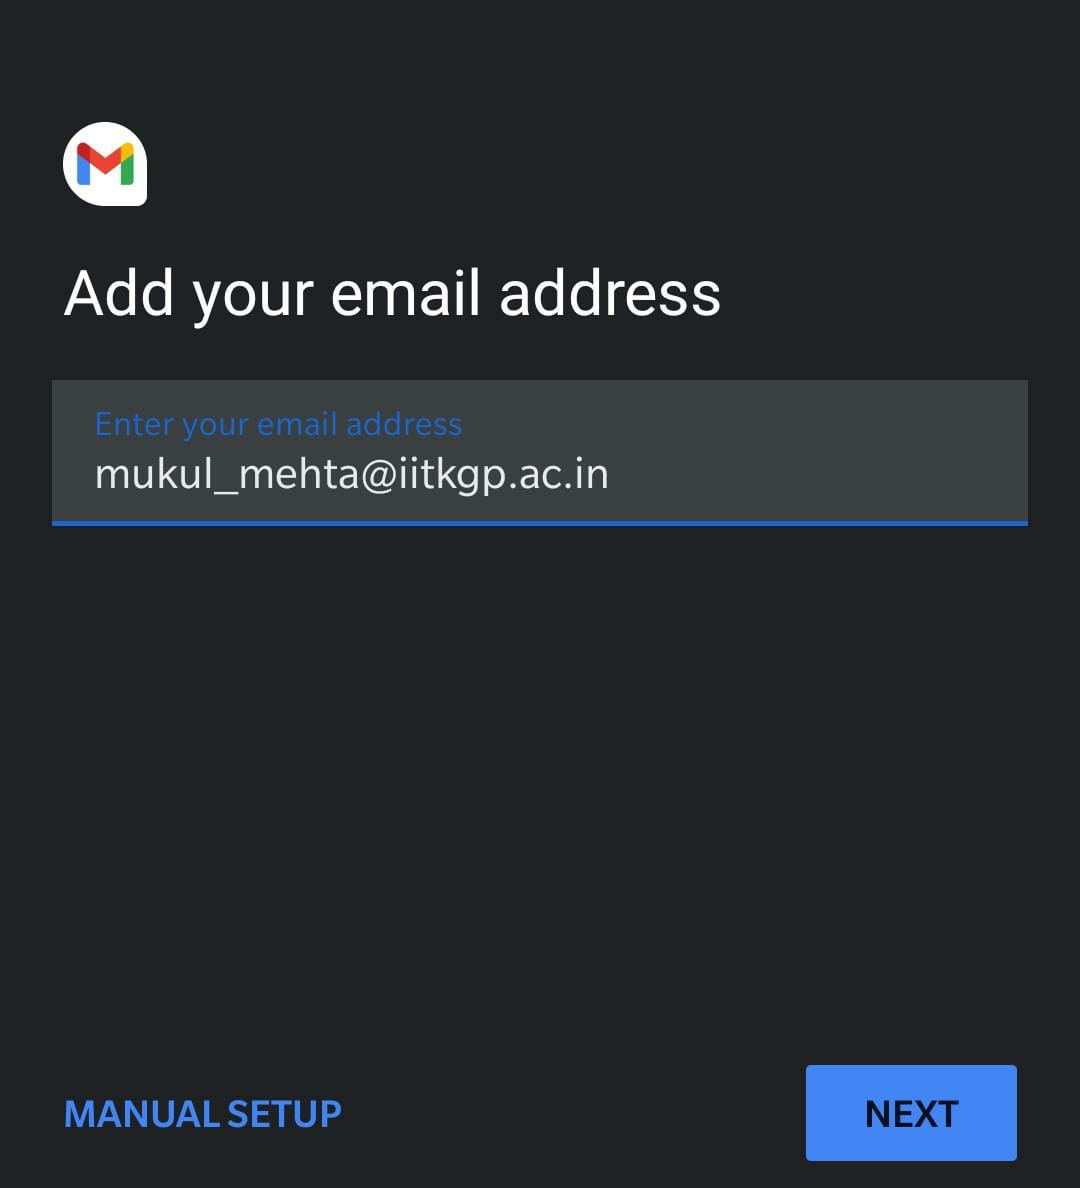 Add email ID and then manual setup